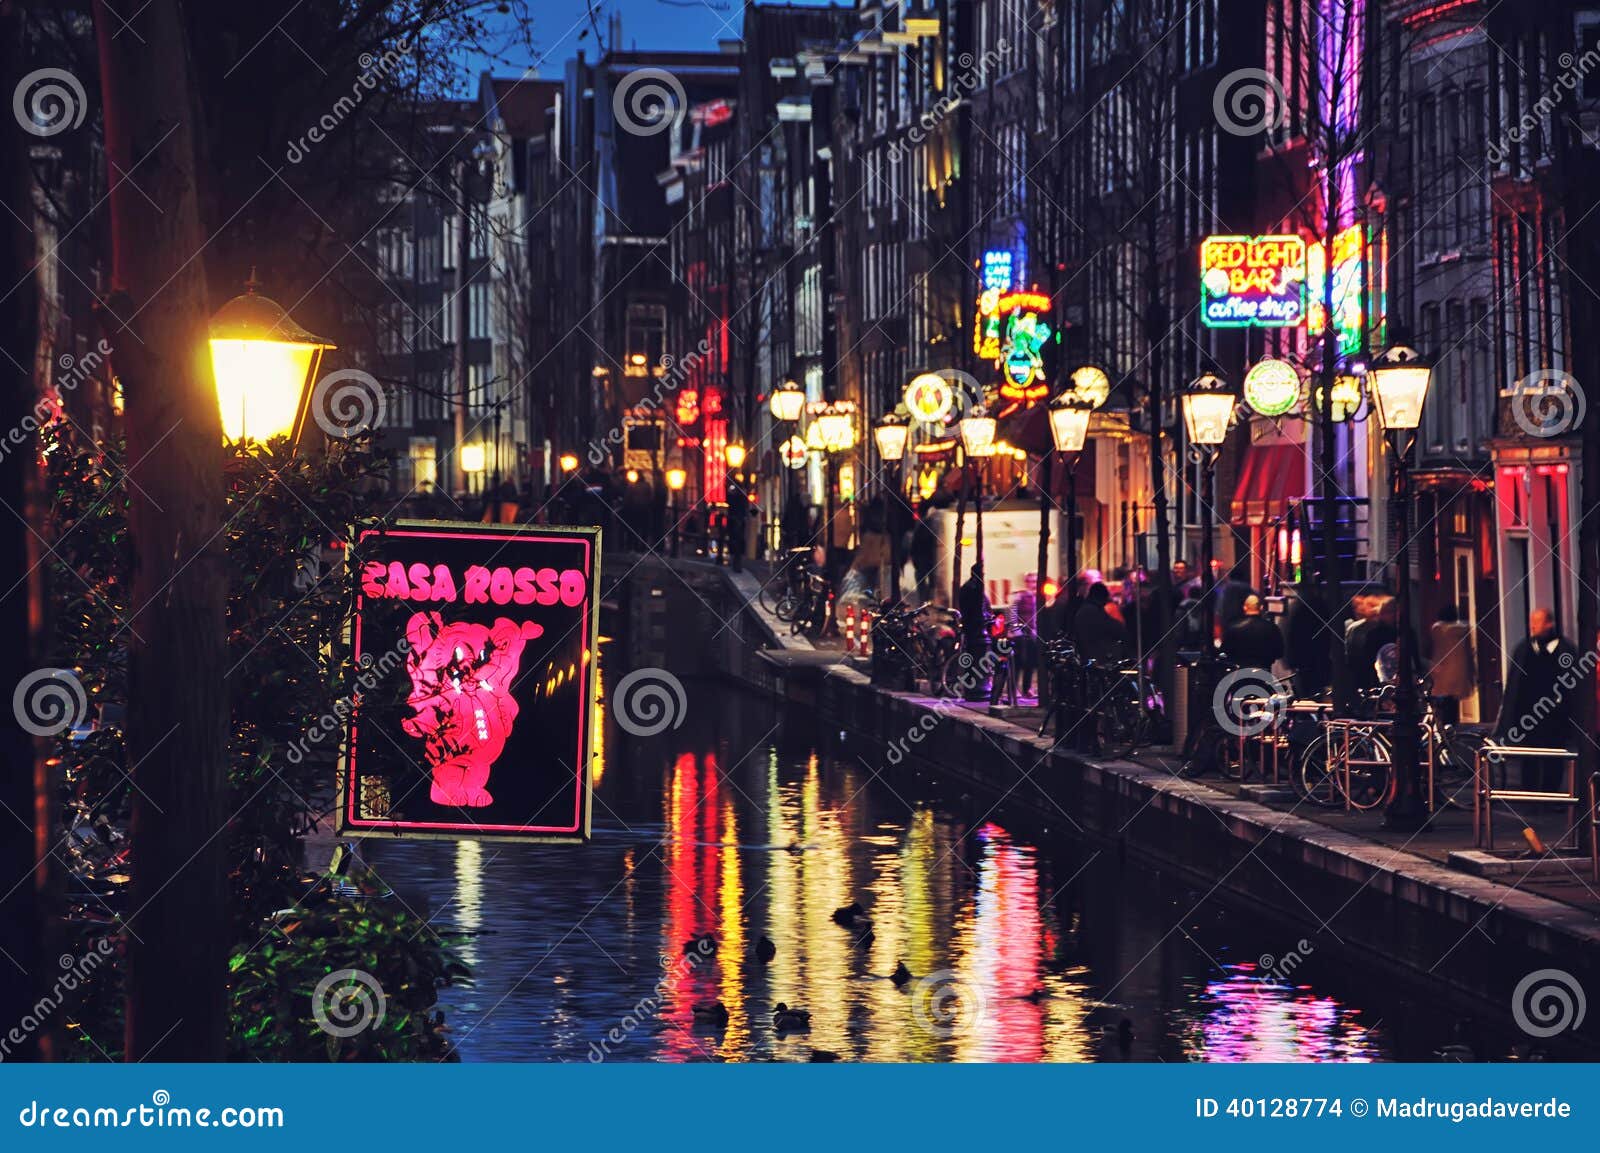 Amsterdam's Changing Red Light District | Travel + Leisure